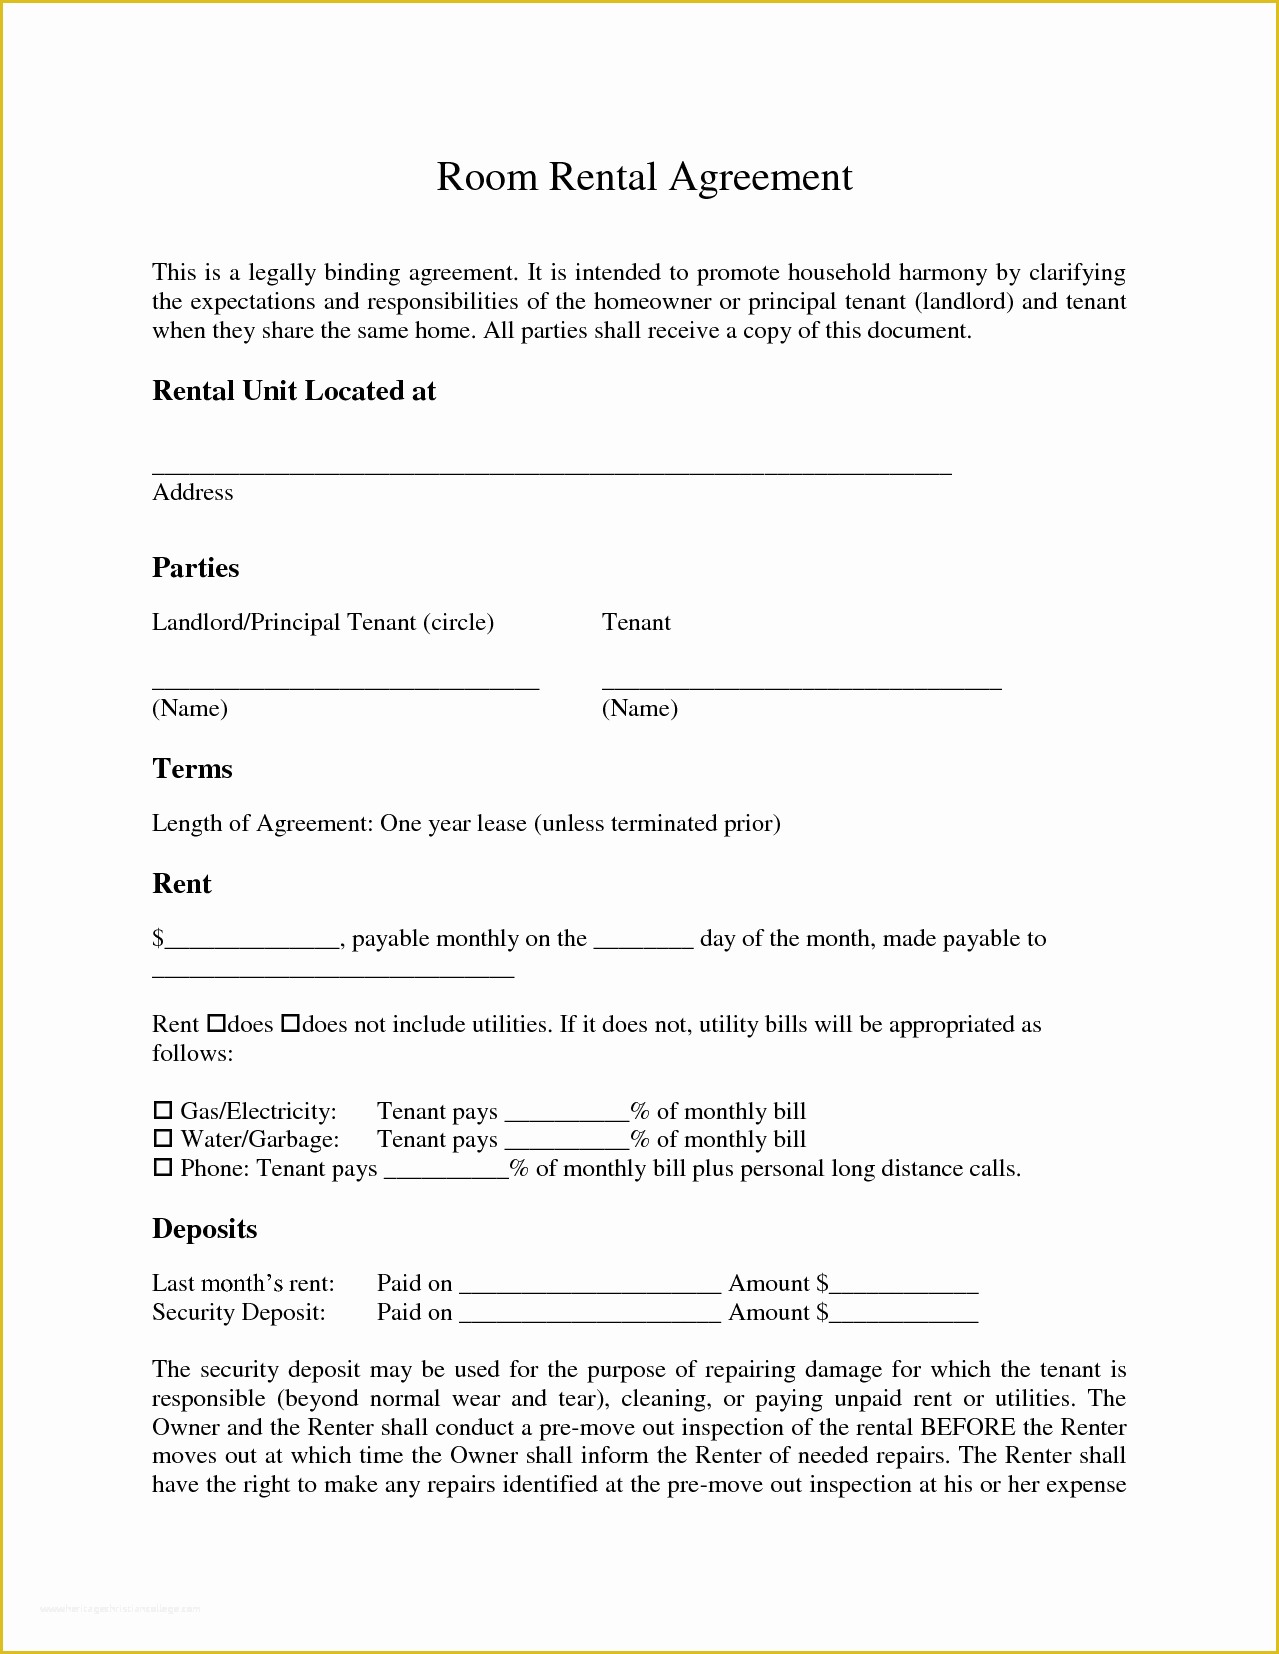 Rental Agreement Template Free Of 6 Room Lease Agreement